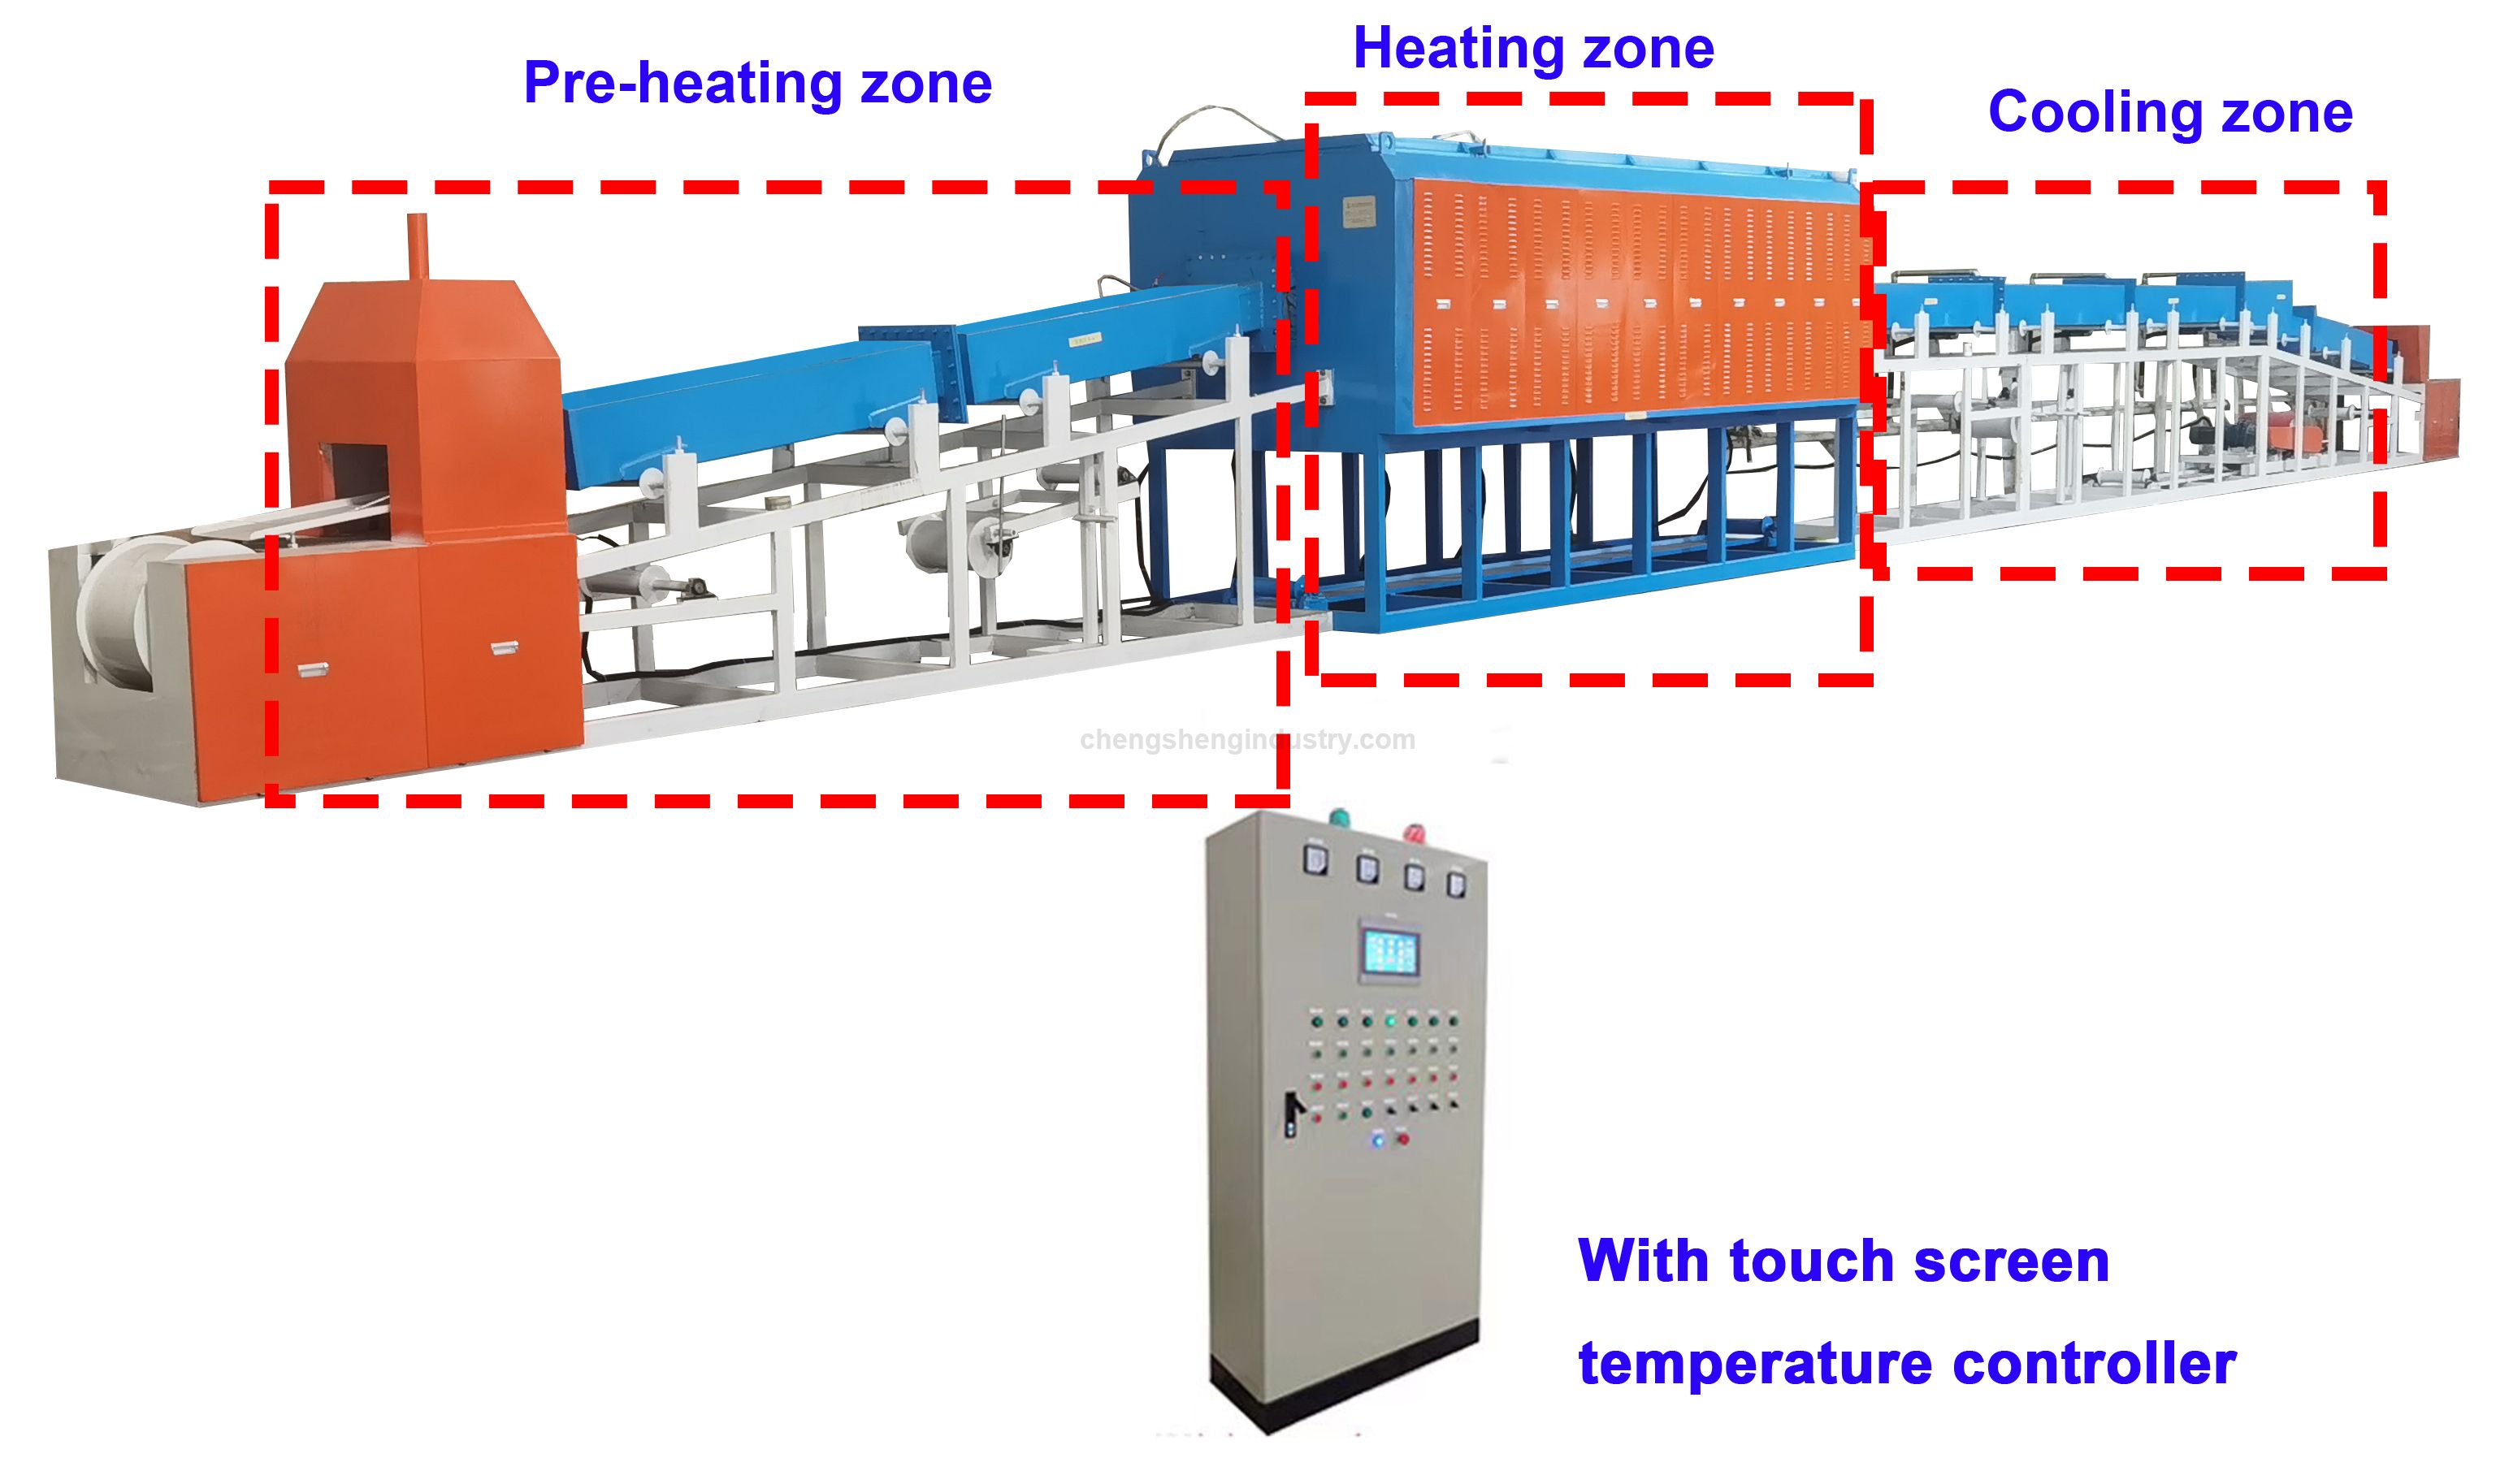 Continuous Mesh Belt Controlled Atmosphere Brazing Furnace Manufacturers